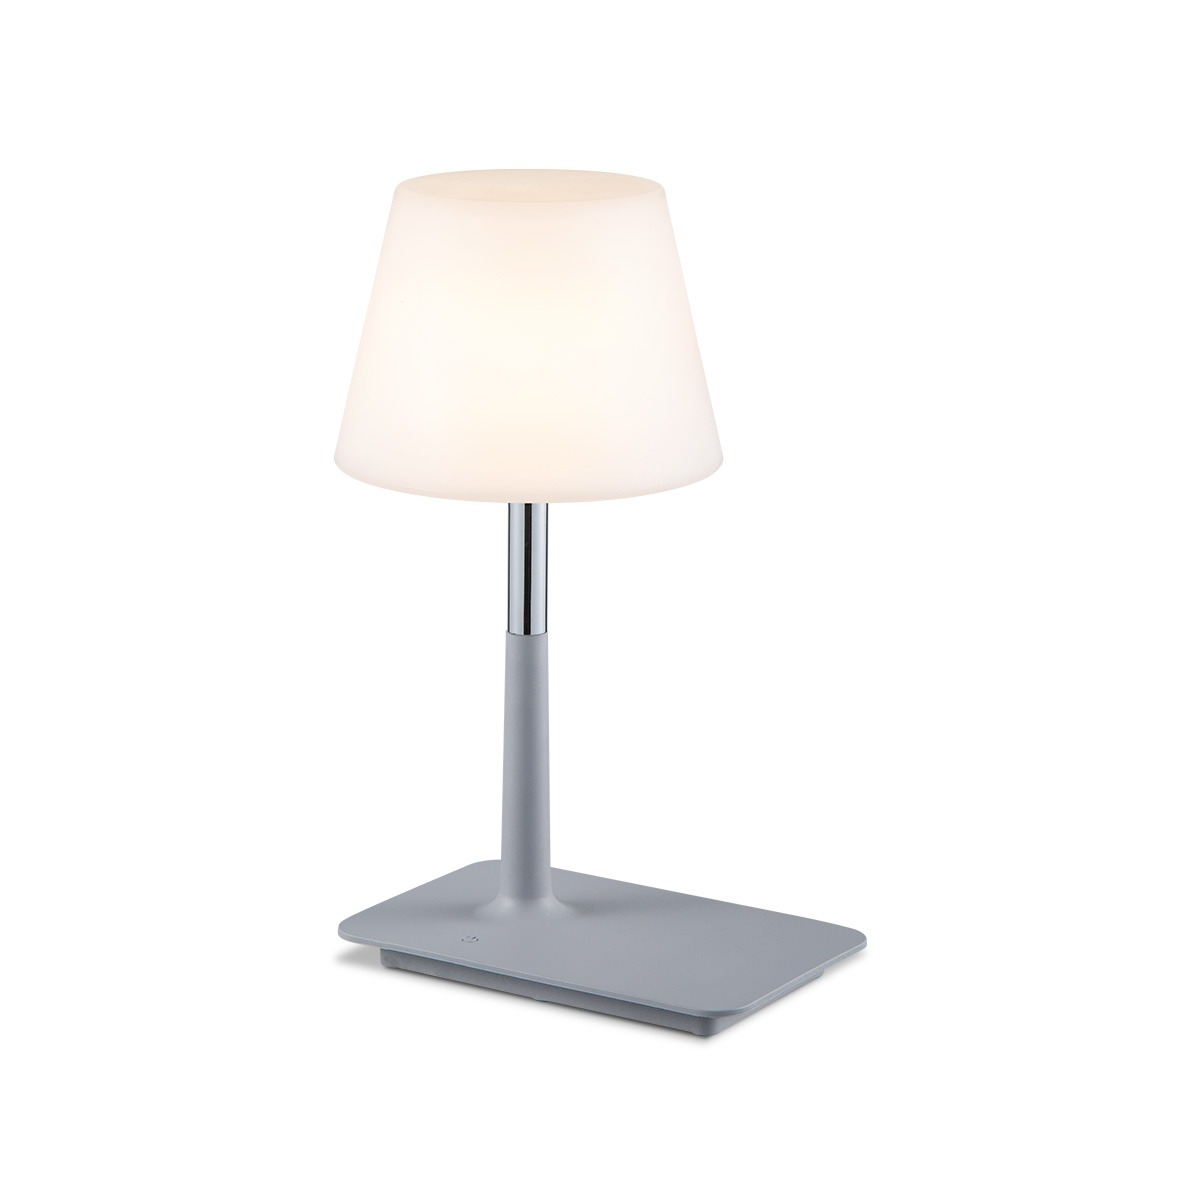 Tangla lighting - TLT7639-01GY - LED table lamp - rechargeable plastic - grey - square